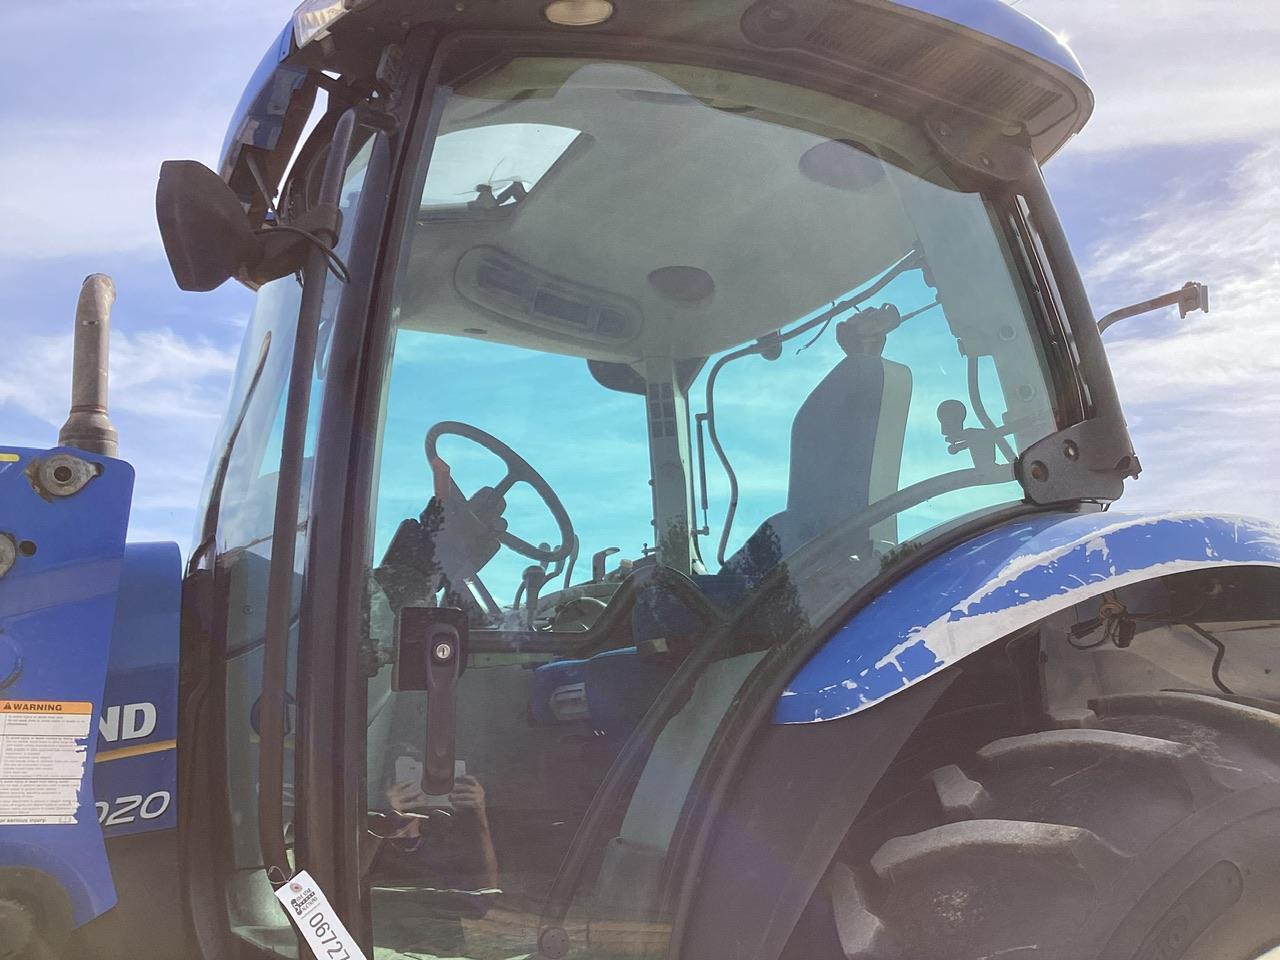 New Holland T6020 Tractor w/ NH 840TL Loader